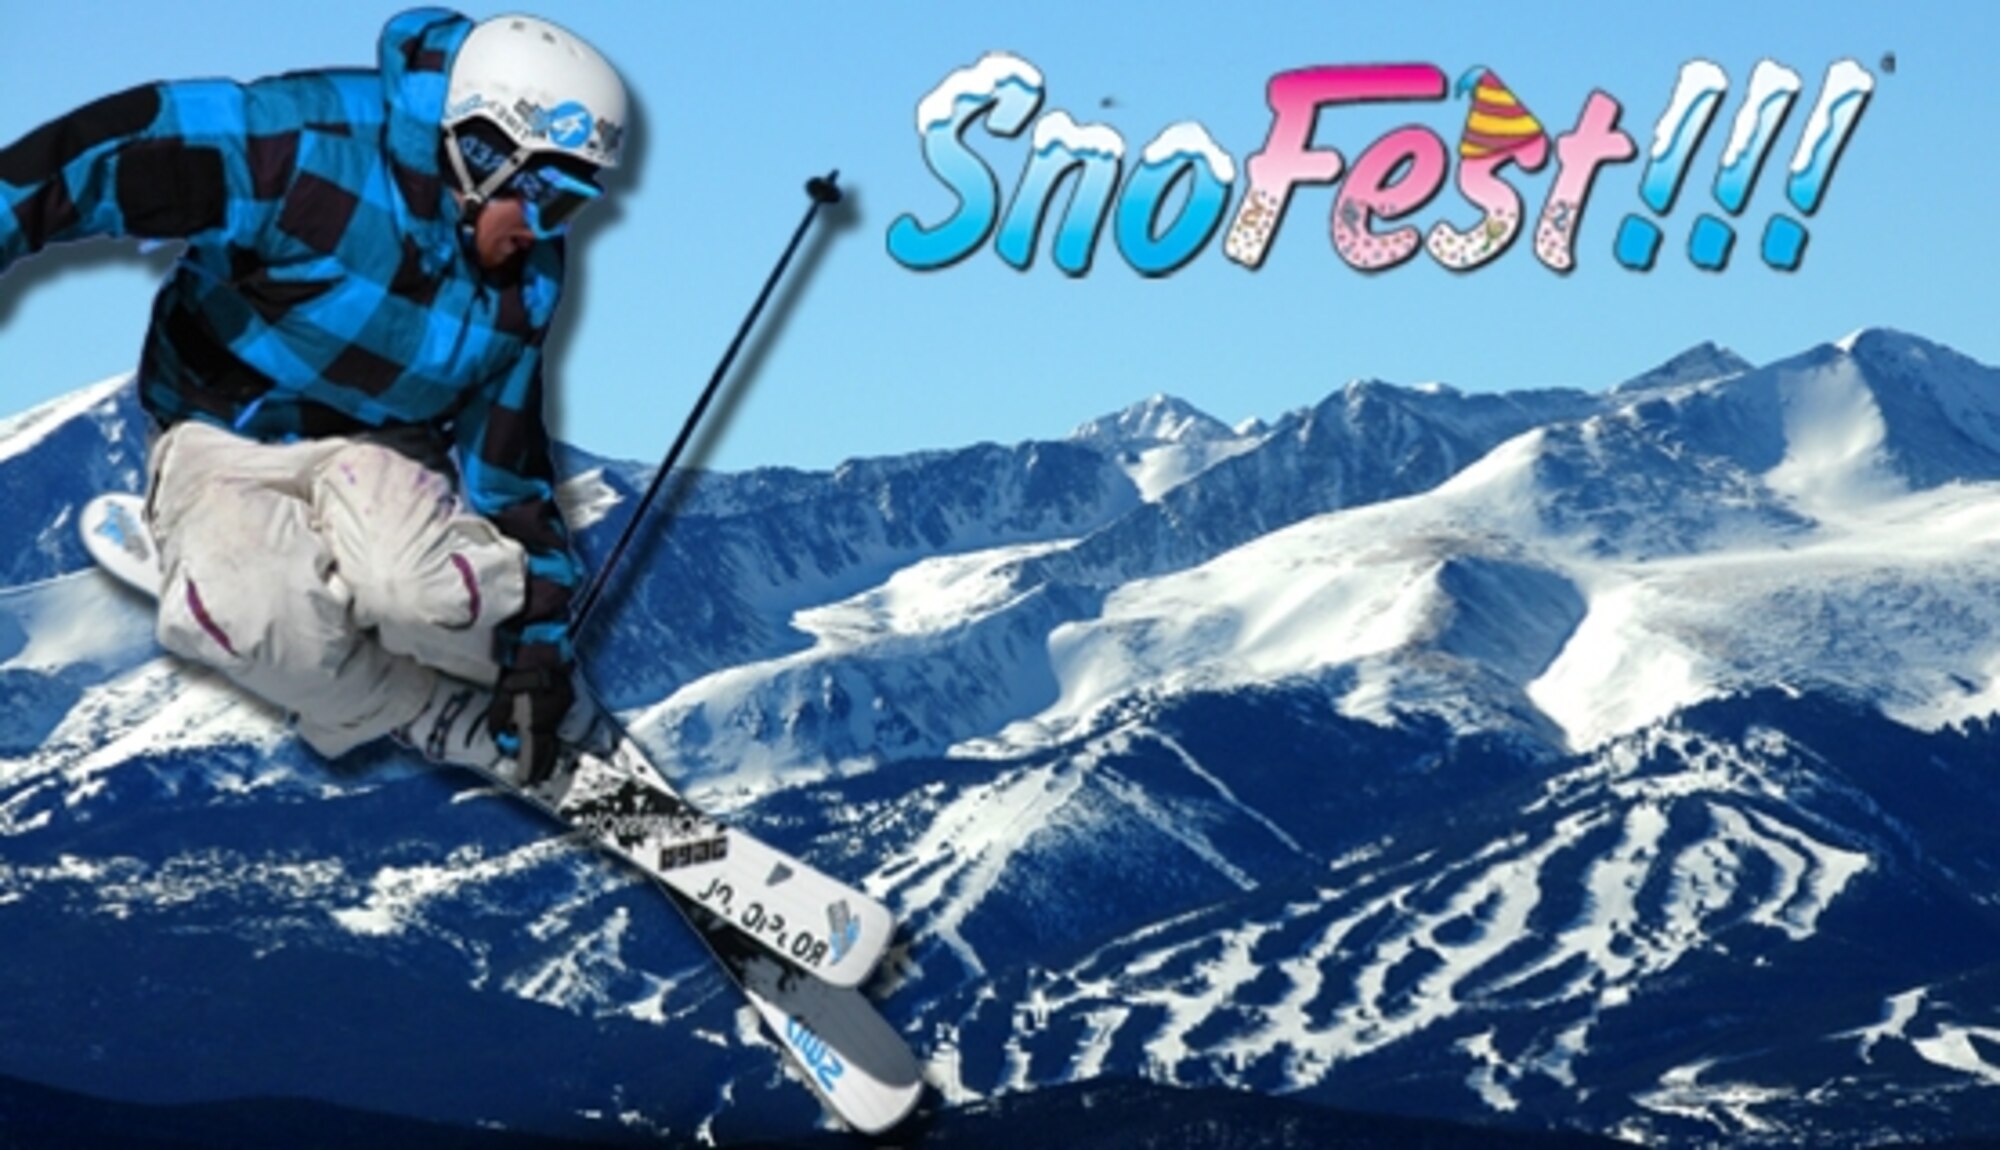 SnoFest features more than world-class skiing and snowboarding! Fabulous lodging, parties, giveaways, races, a hilarious cardboard derby, sleigh rides, tubing, ice-skating, non-skier excursions and more. All at a heavily discounted prices for the military community. You won't want to miss this spectacular event hosted by the Front Range Military Bases at Keystone Resort, Colorado. www.mysnofest.com for more details.